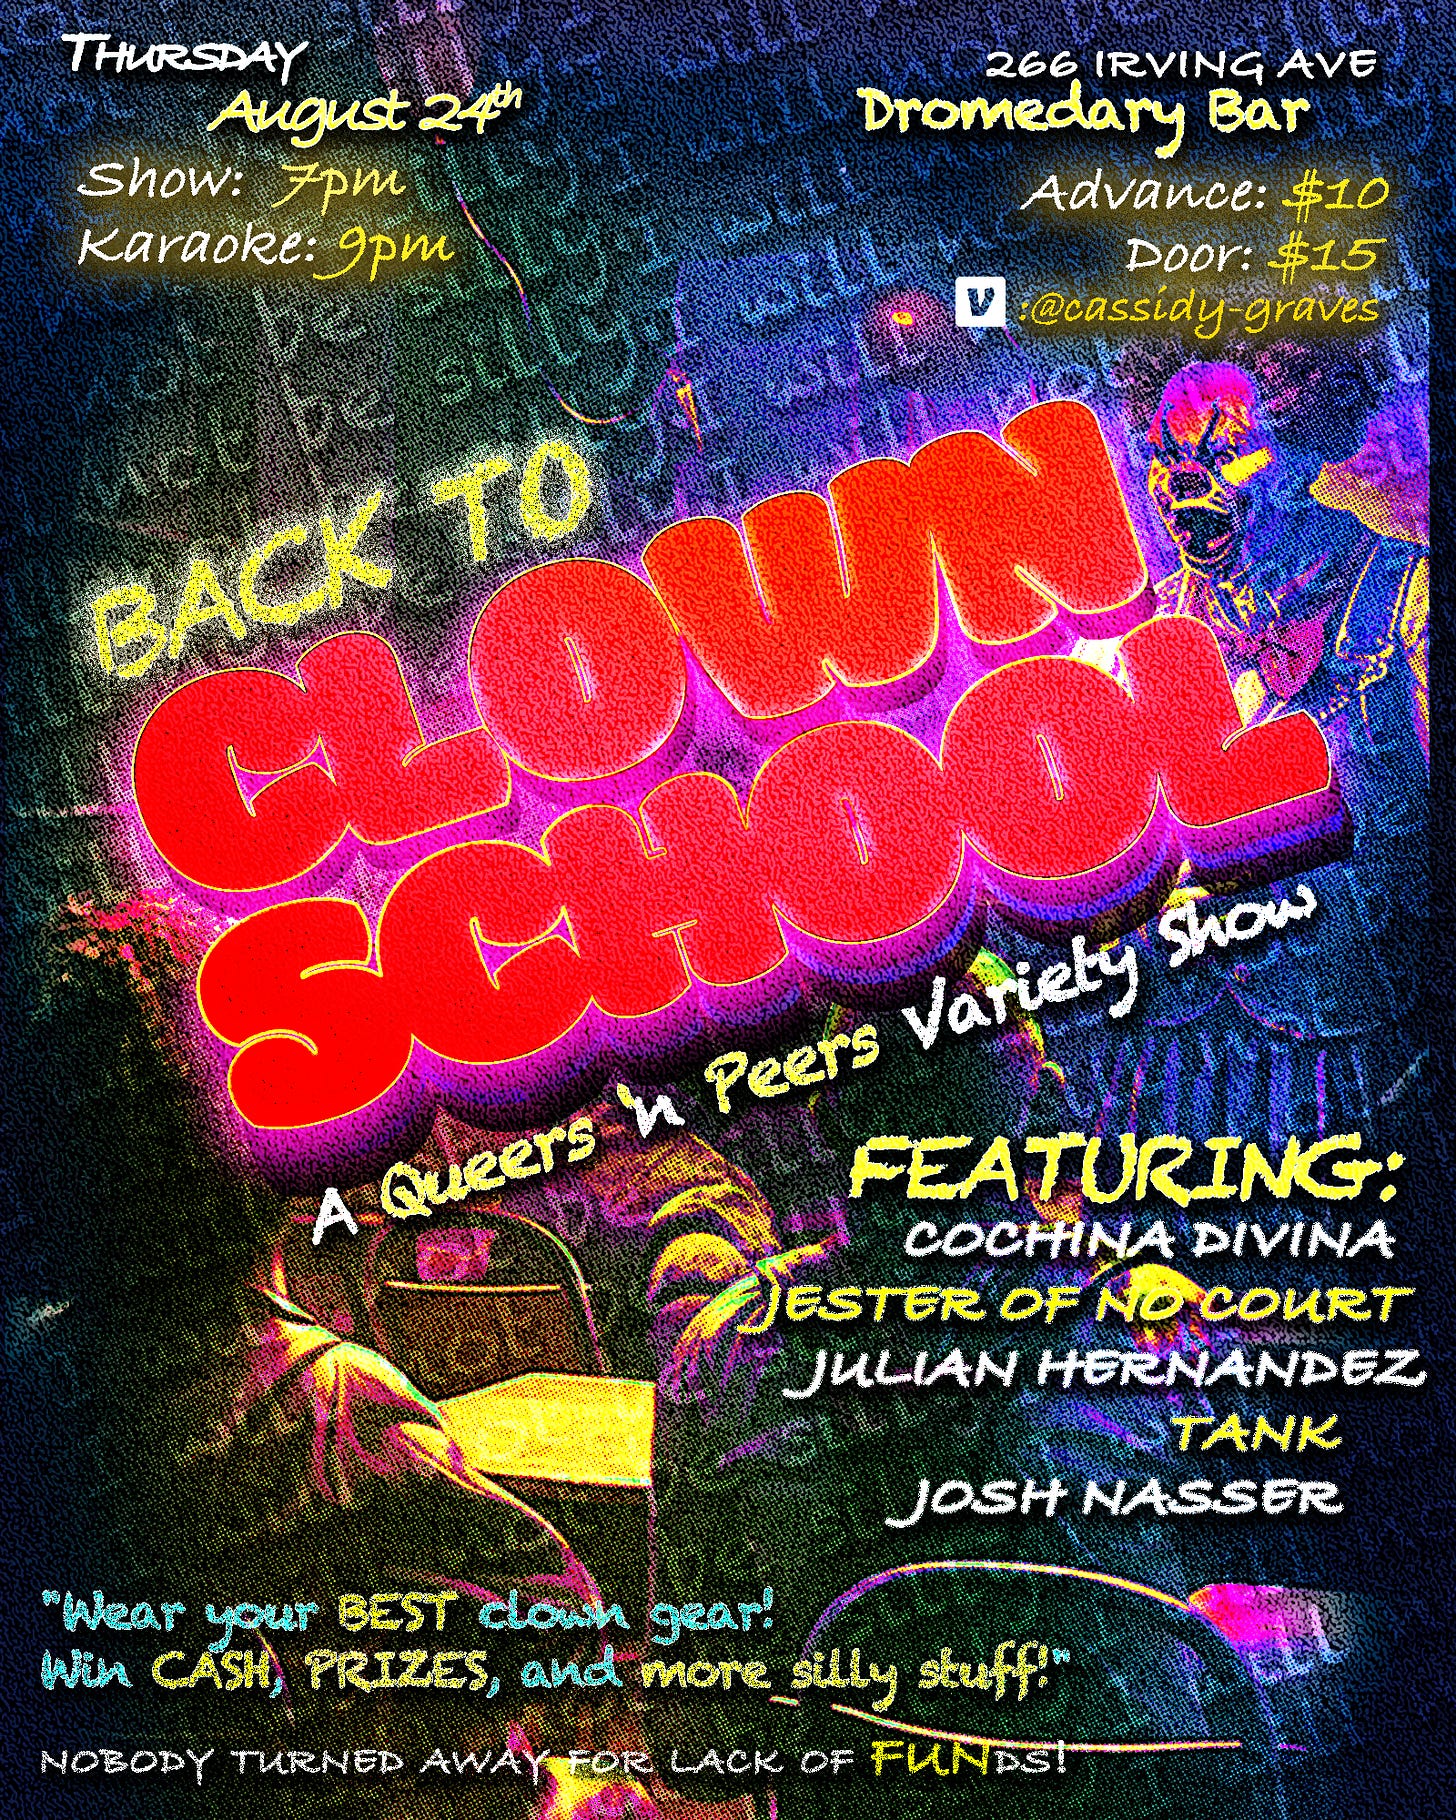 poster for Queers N Peers: Back To Clown School on Thursday August 24. Show: 7pm, Karaoke: 9pm. At Dromedary Bar, 266 Irving Avenue. Featuring: Cochina Divina, Jester of No Court, Julian Hernandez, Tank, and Josh Nasser. "Wear your best clown gear! Win cash, prizes, and more silly stuff! Nobody turned away for lack of funds!"